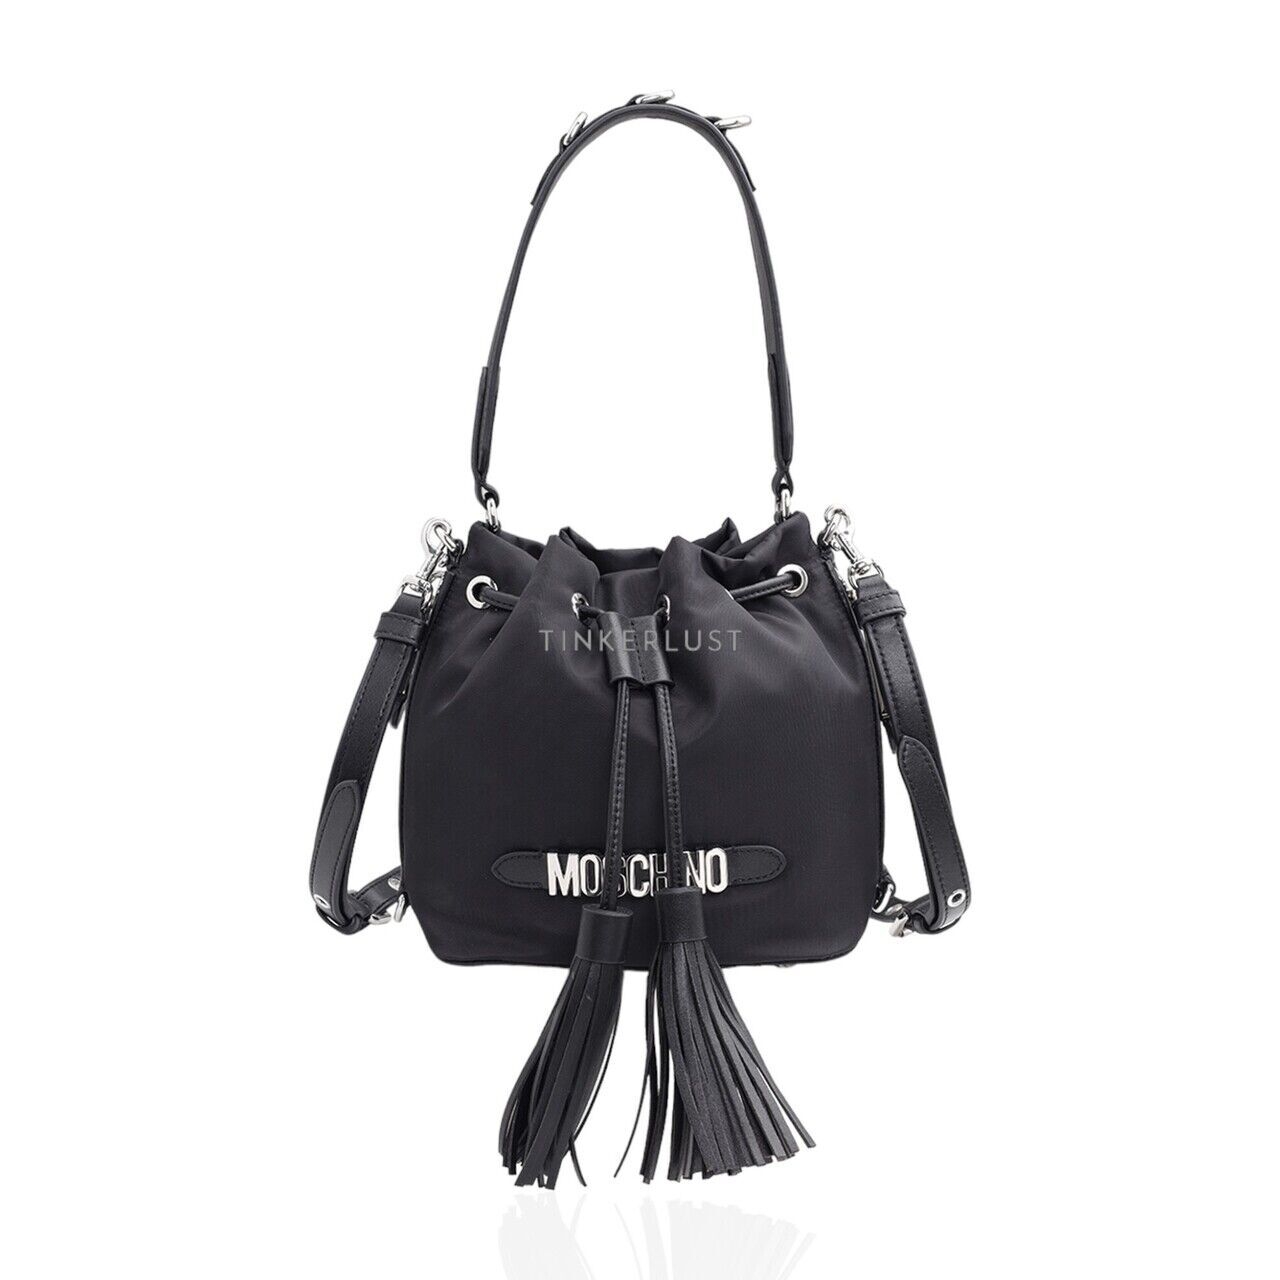 Moschino Mini Lettering Logo In Black SHW with Tassels Bucket Bag